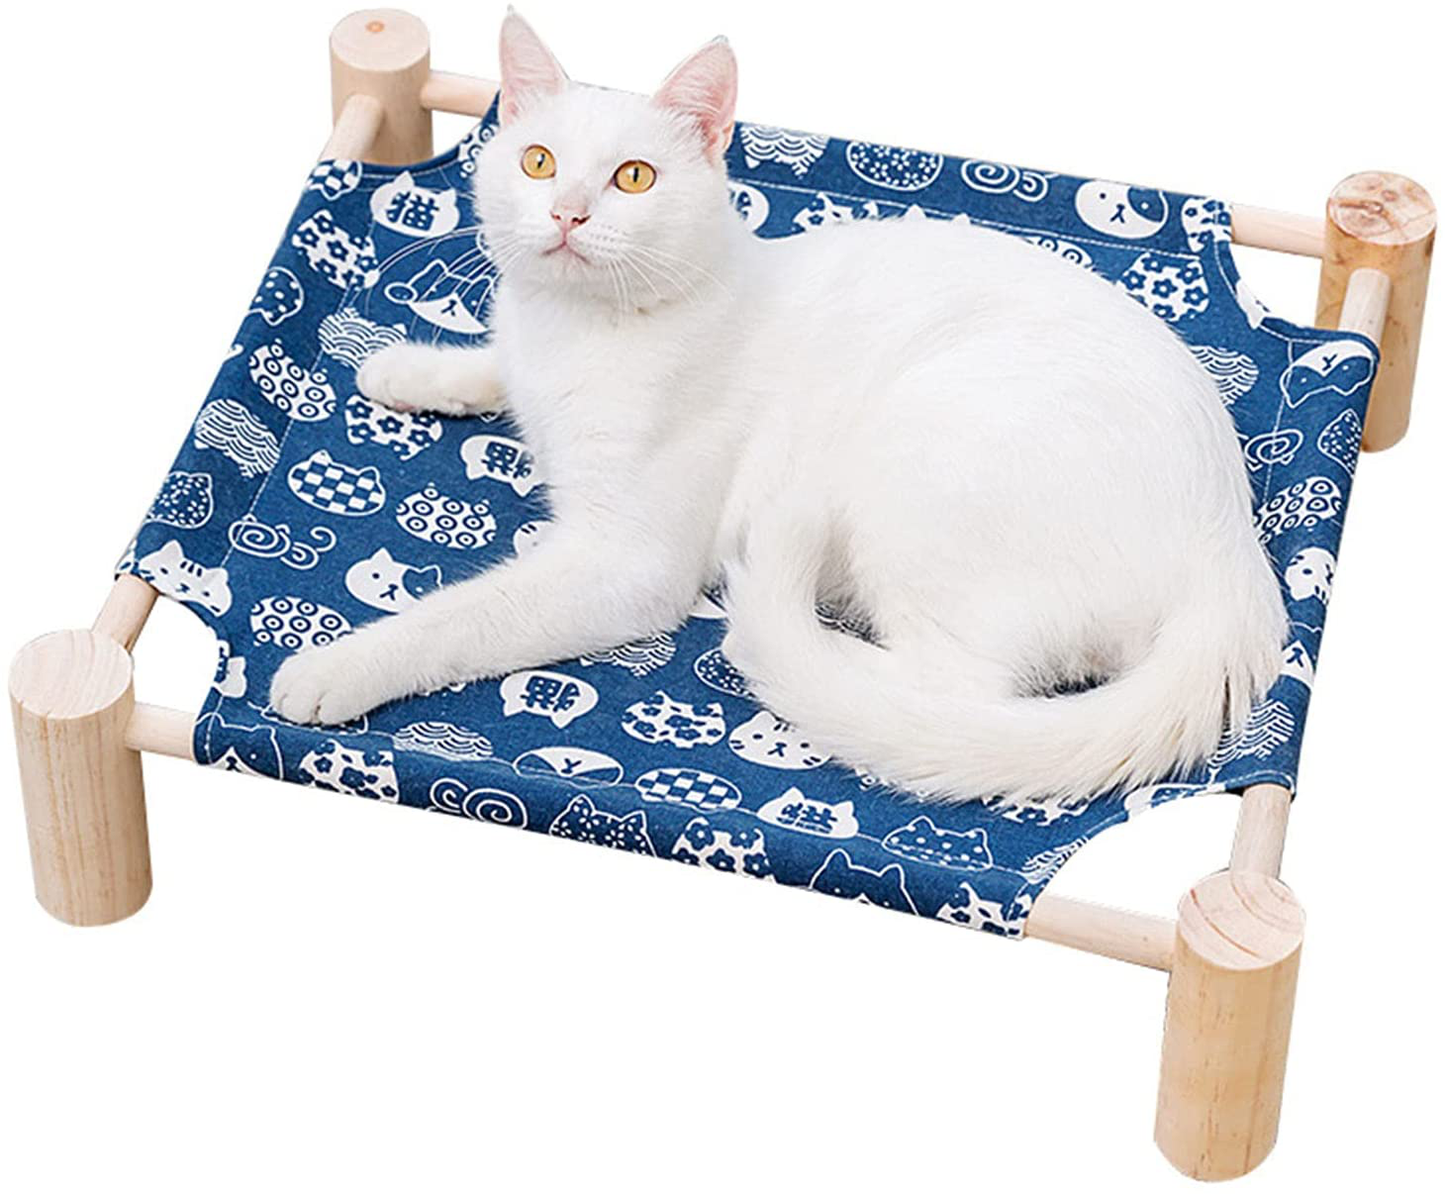 Cat and Dog Hammock Bed, Wooden Cat Hammock Elevated Cooling Bed, Detachable Portable Indoor / Outdoor Pet Bed, Suitable for Cats and Small Dogs